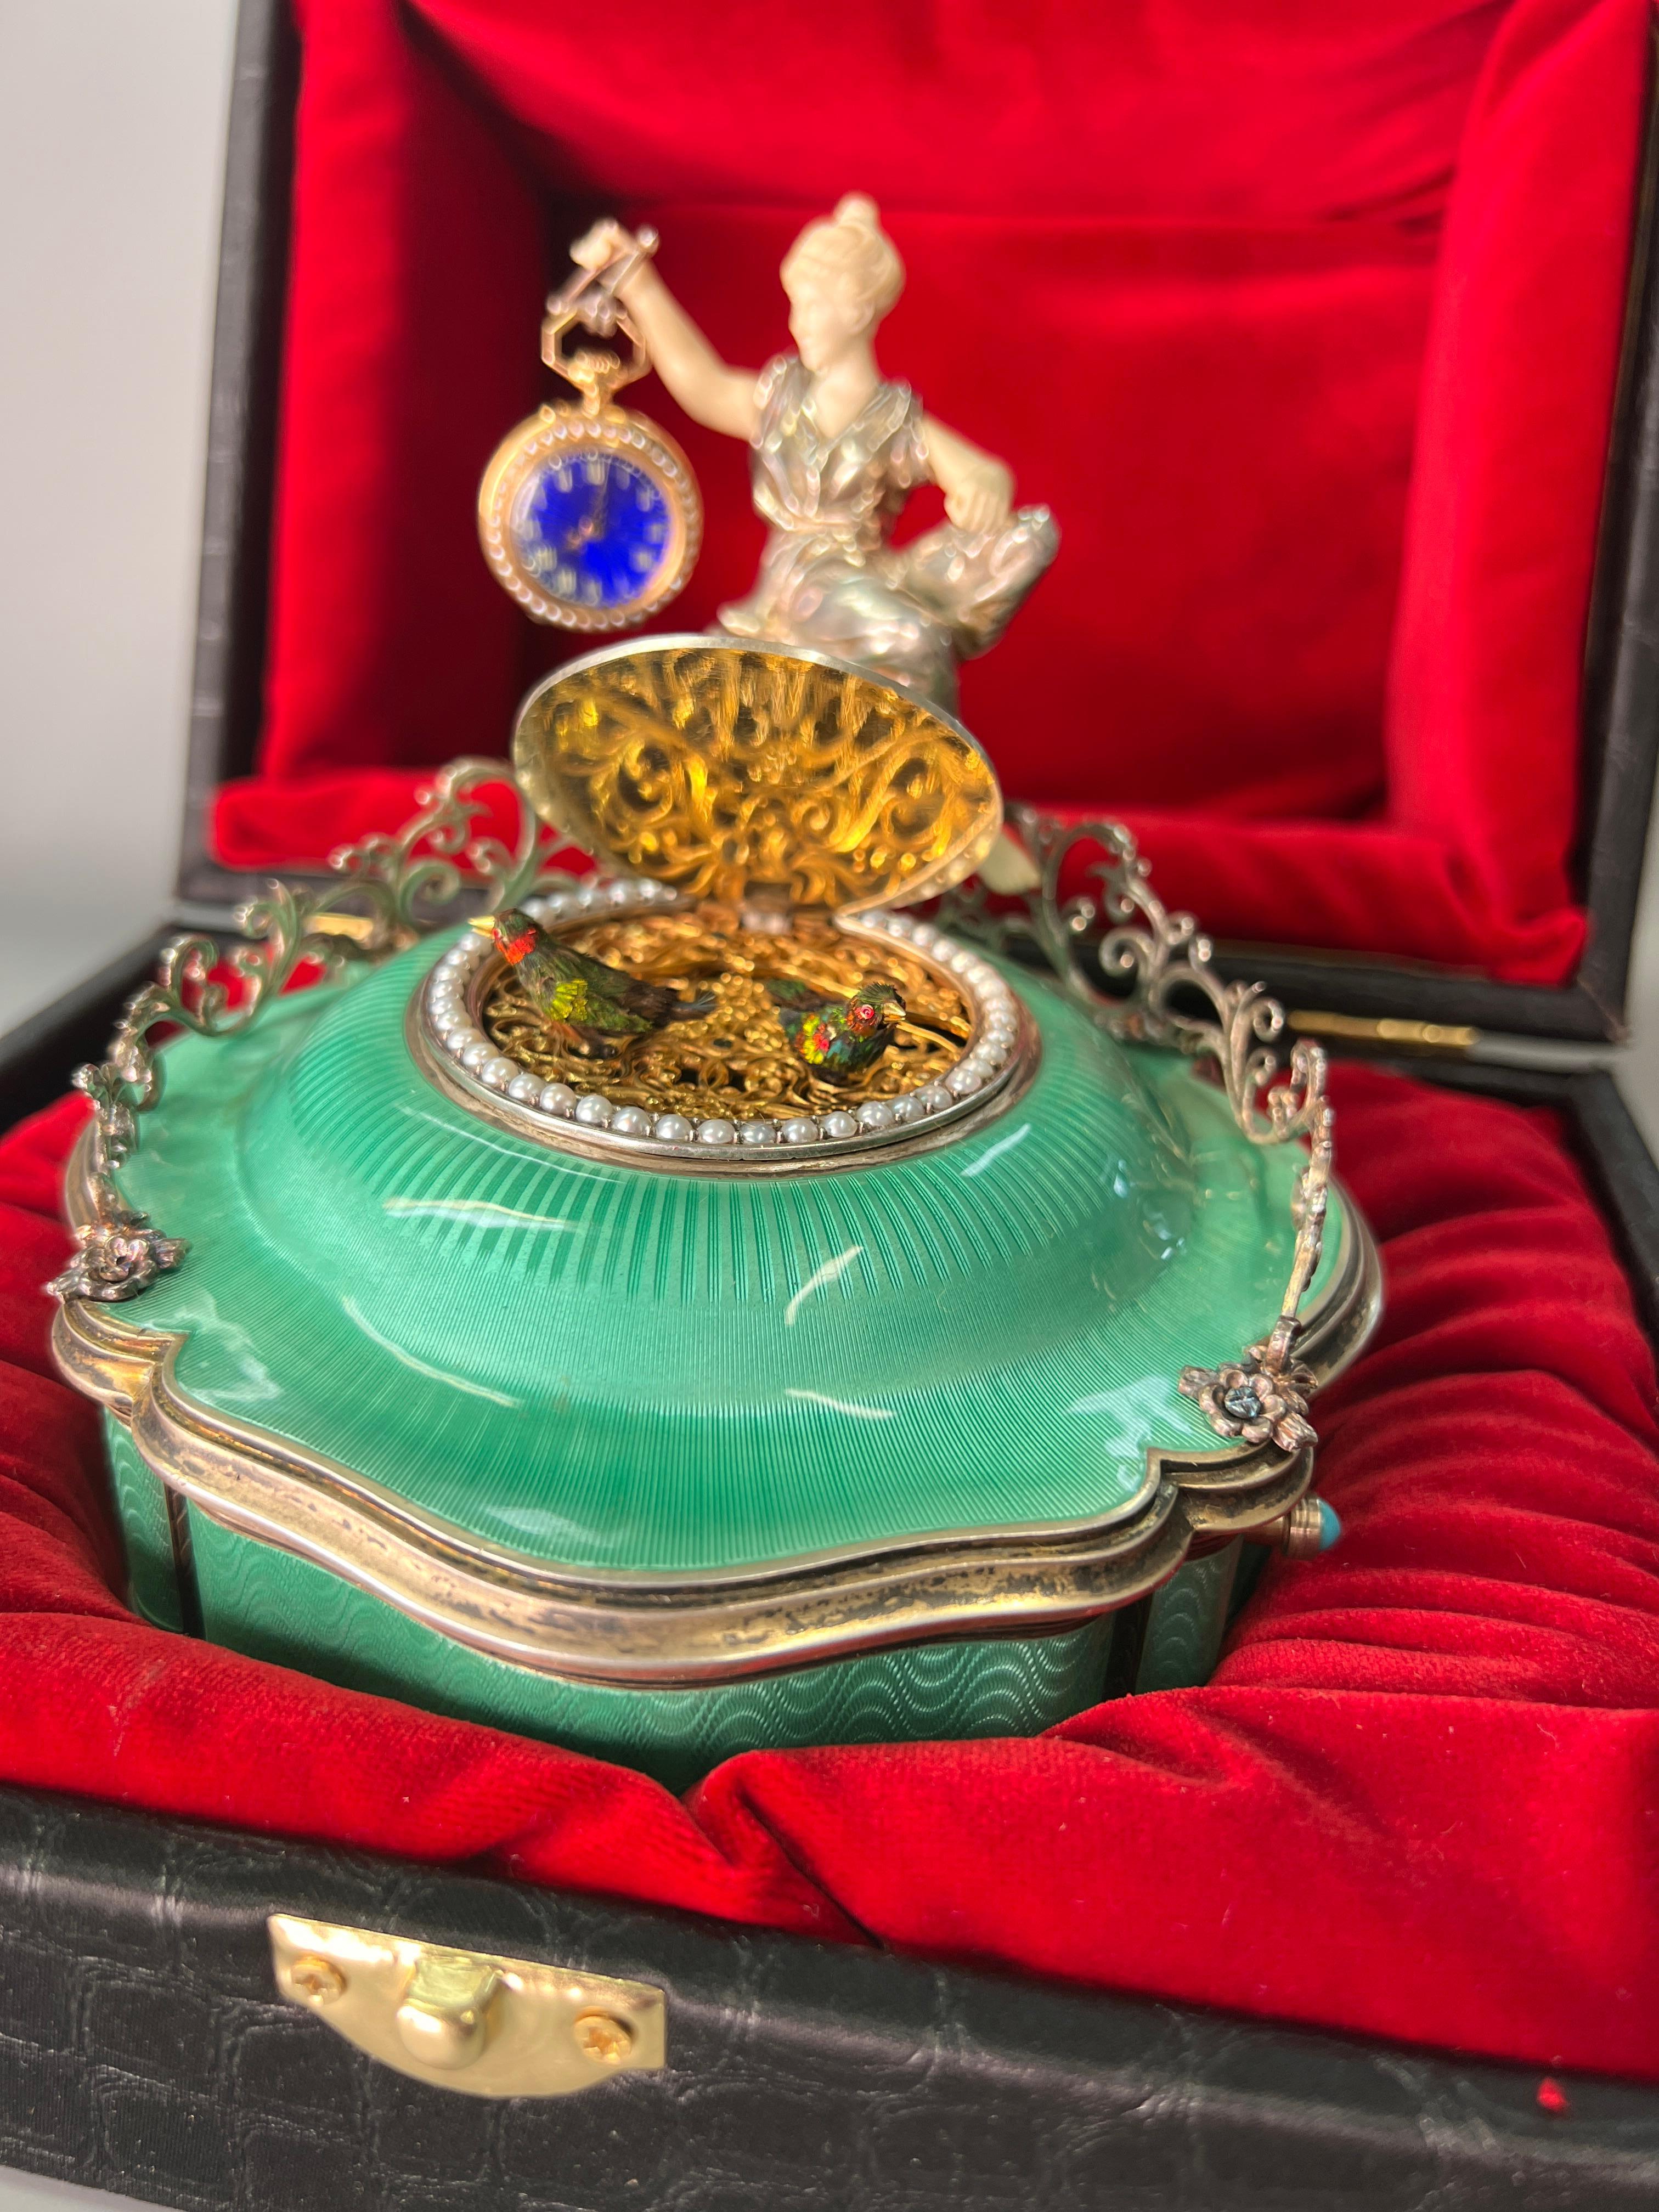 This wonderful modern masterpiece has been created using original antique and vintage elements. The beautiful silver and guilloche enamel case dates to the early 20th century, the box upon pressing the start button reveals not one but two wonderful